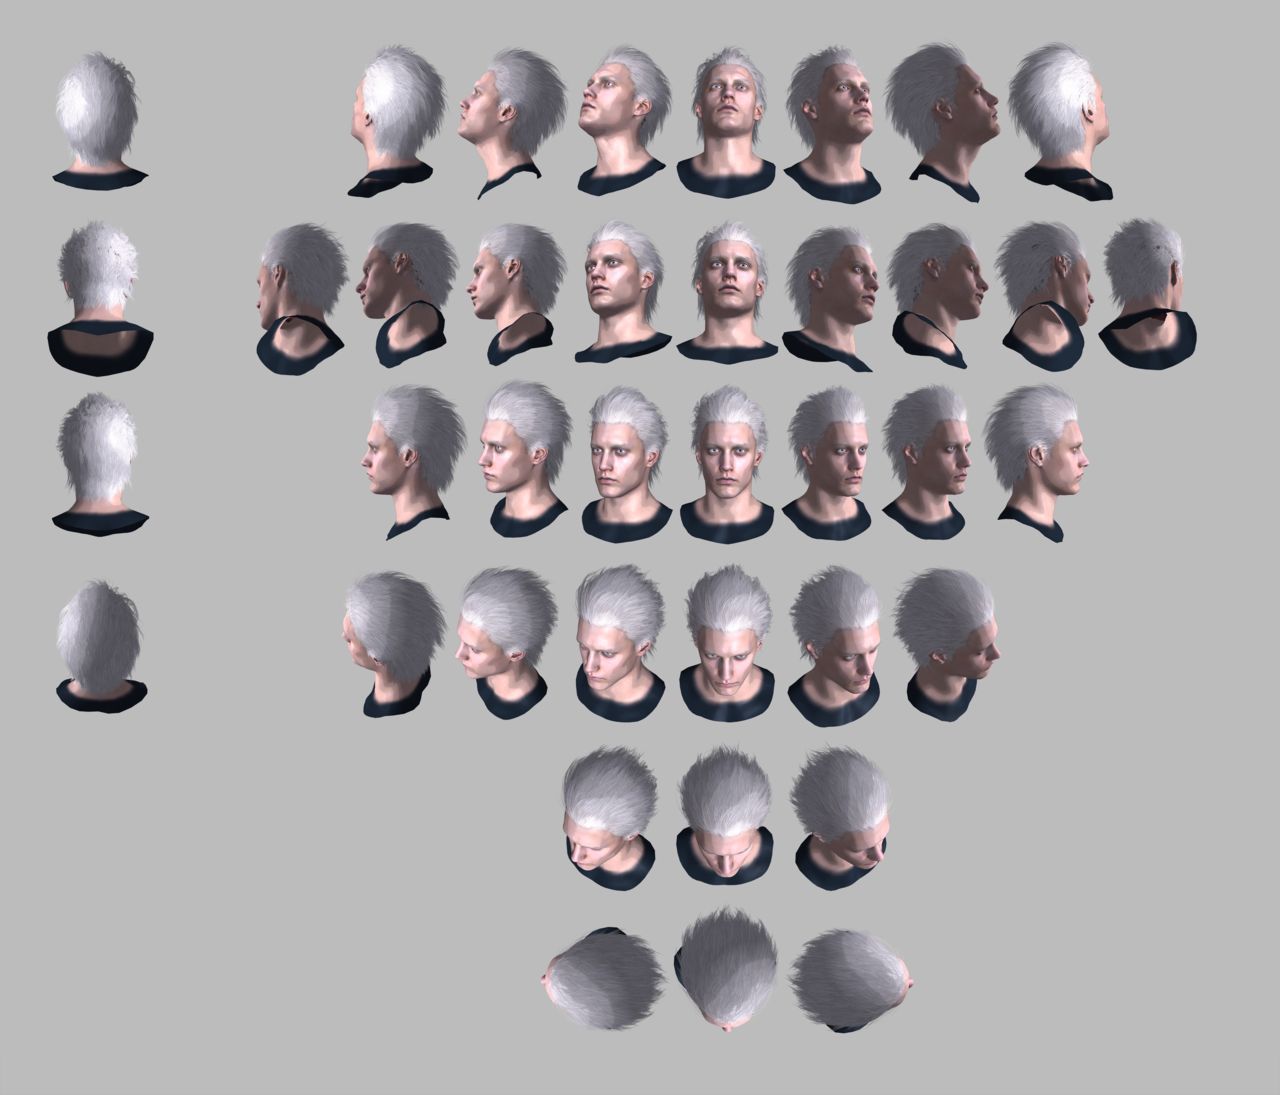 [J.A.] DMC5 | Vergil Head Reference PNG 1